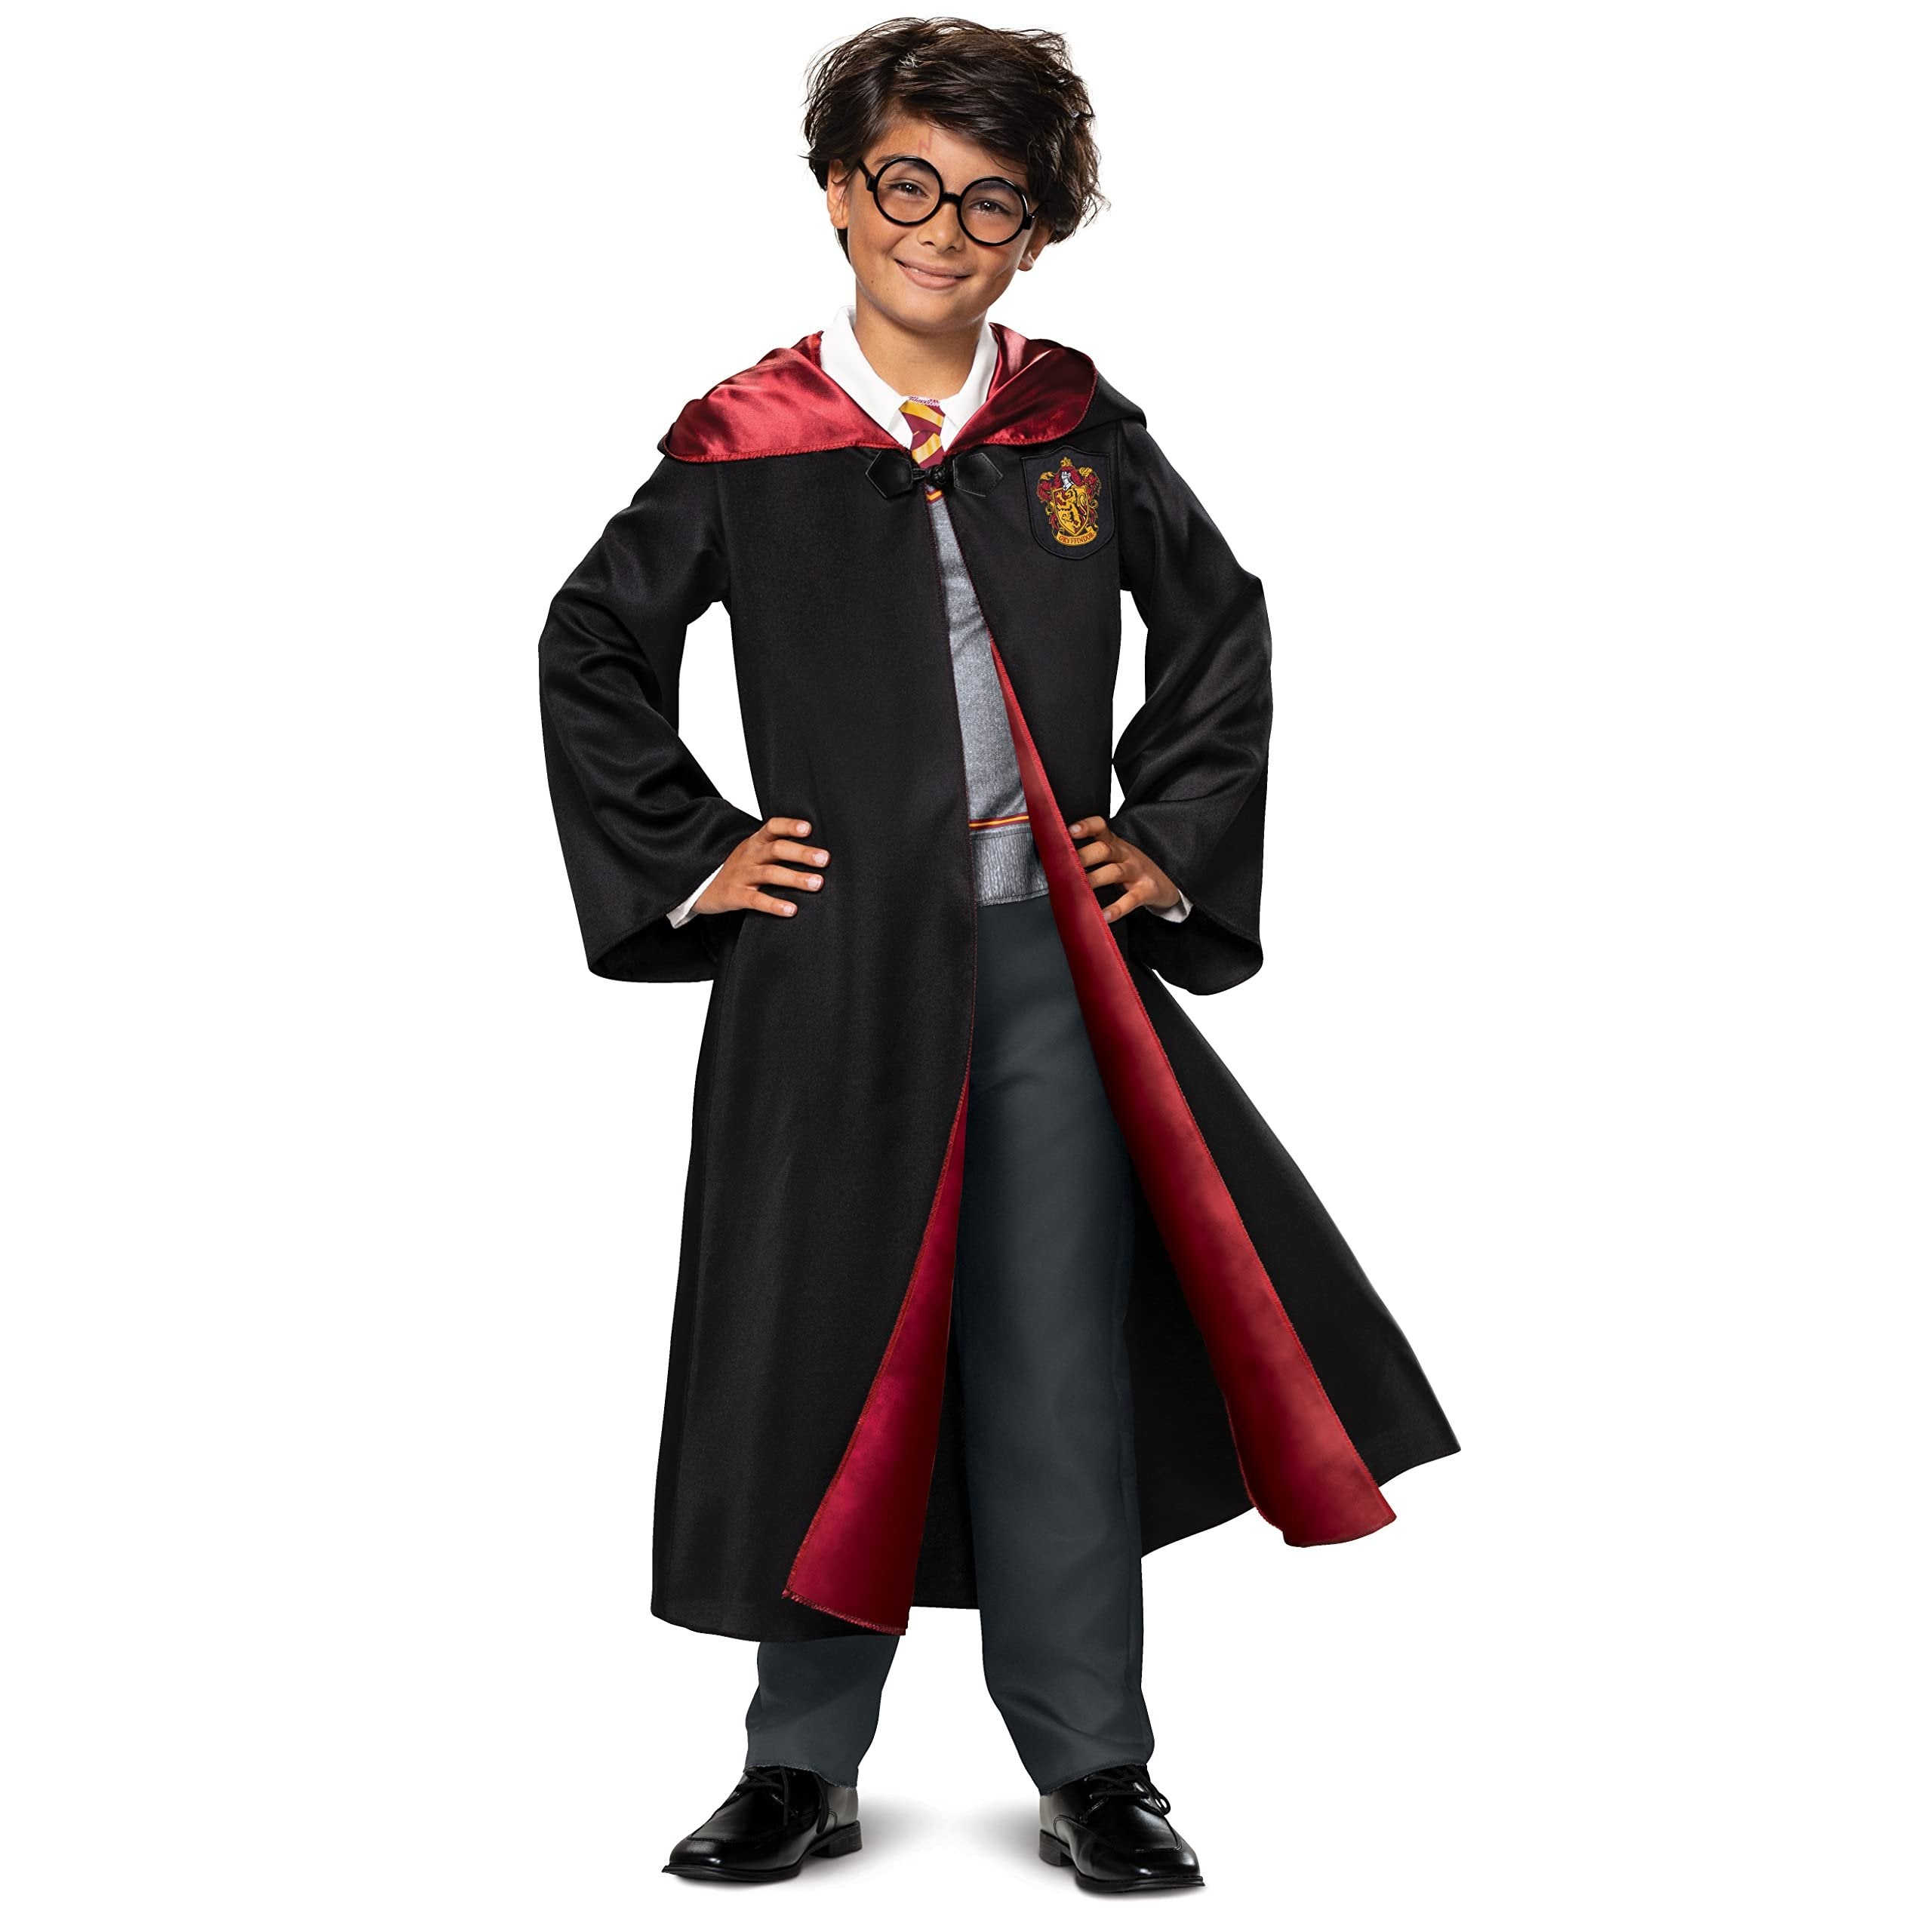 Disguise Harry Potter Costume Kids Deluxe Hooded Robe and Jumpsuit, Children Size Medium (7-8), Black & Red (107529K)